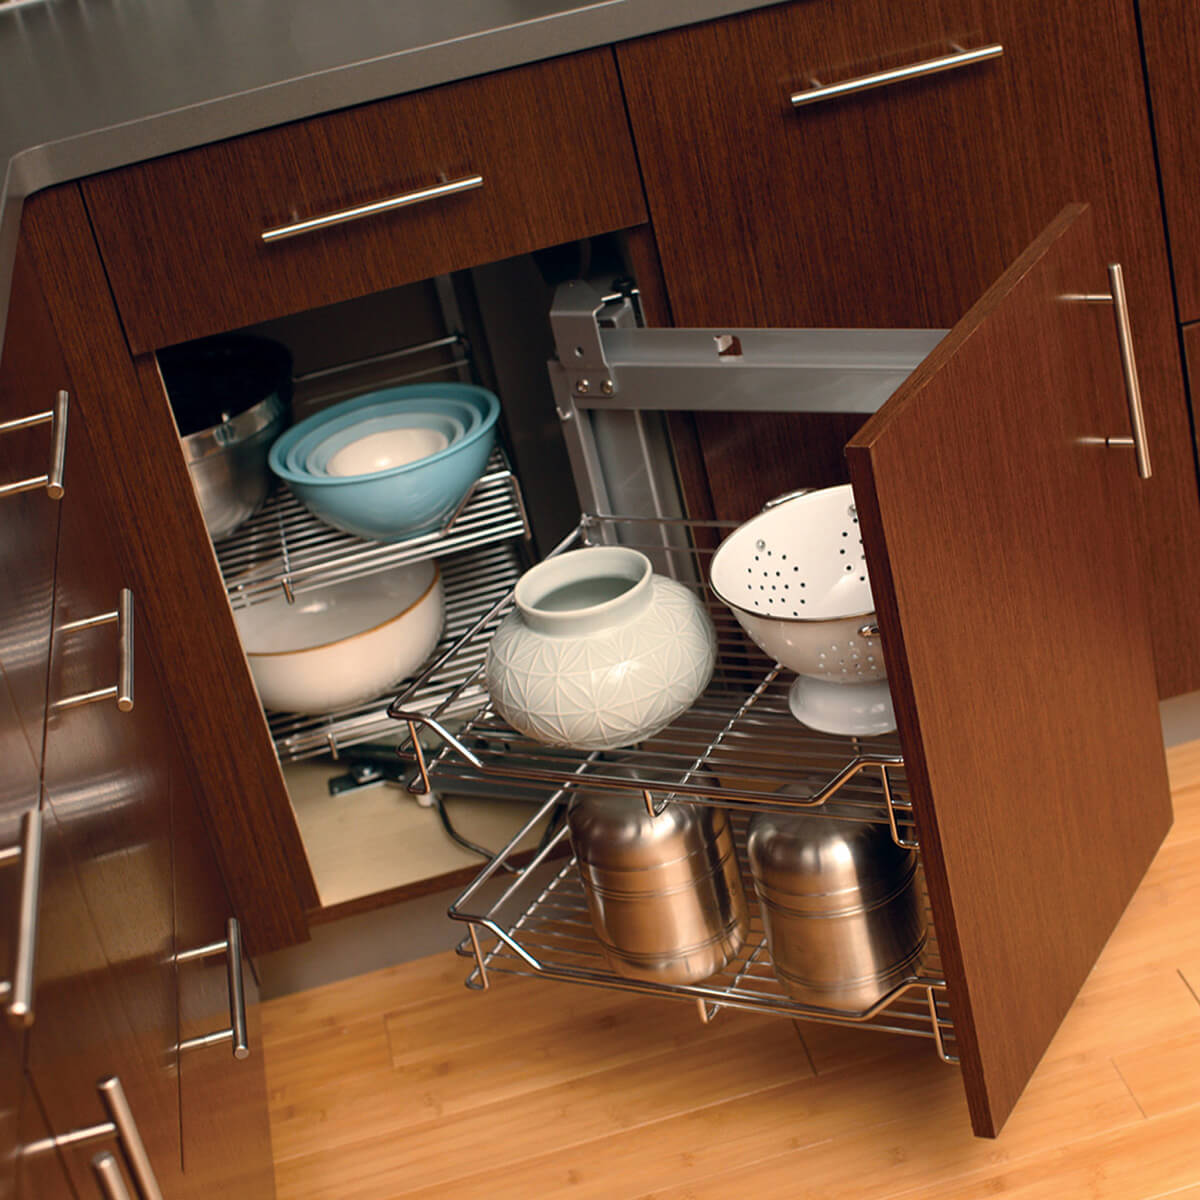 Pull-out corner storage racks in a base cabinet from Dura Supreme Cabinetry.